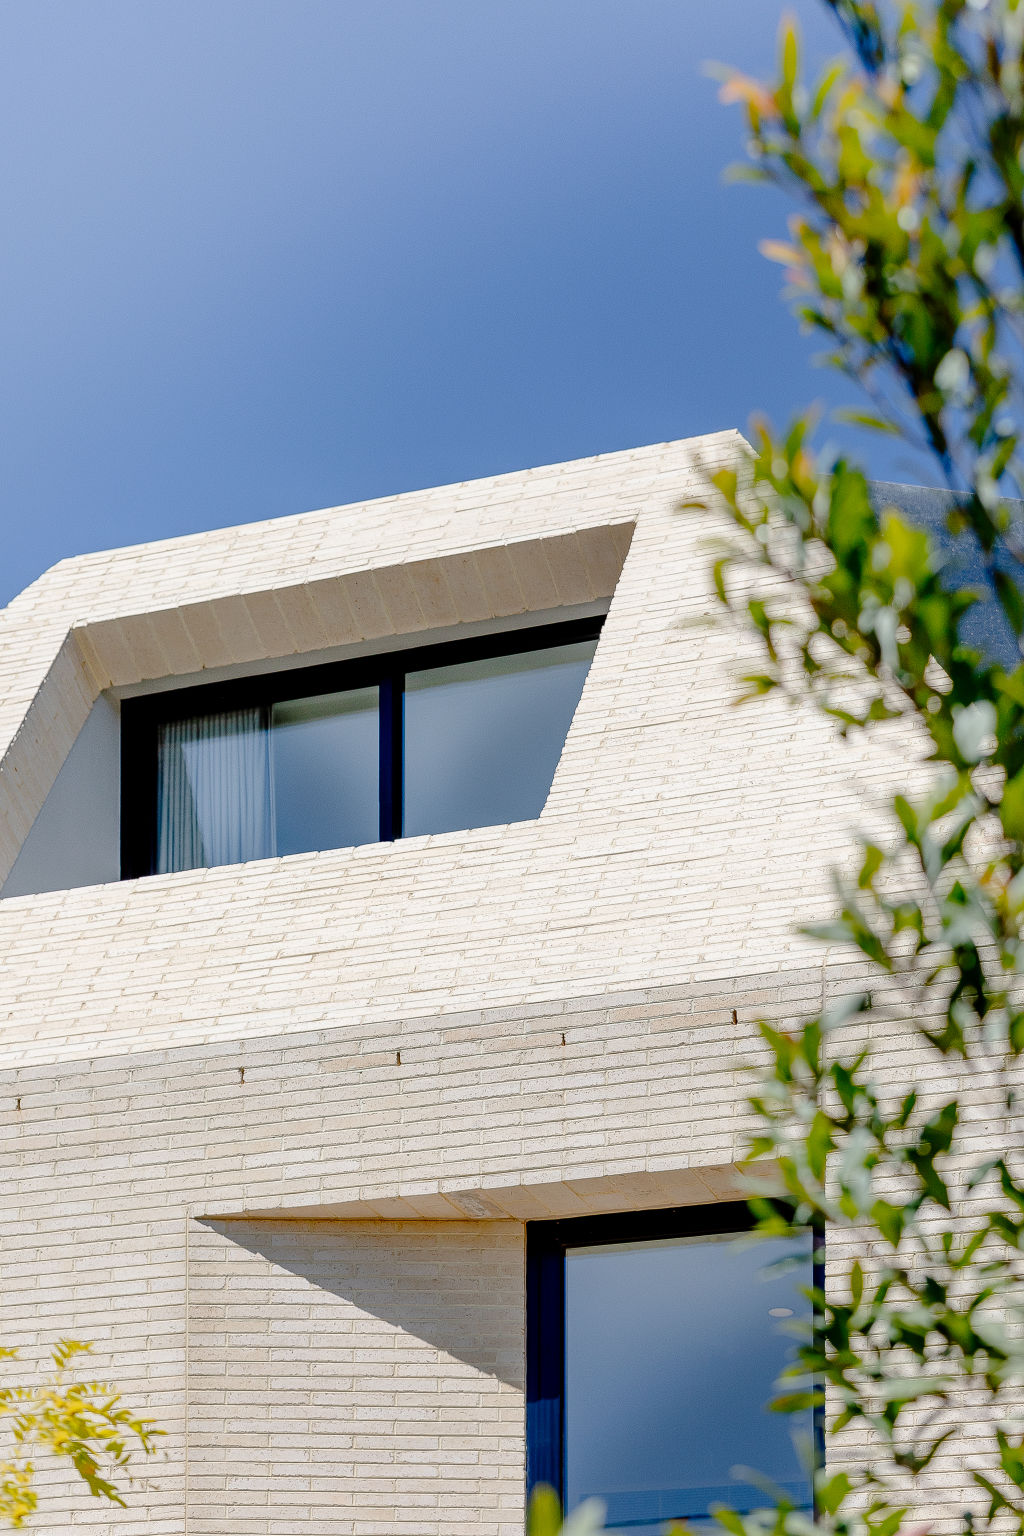 The striking angles create a building with enviable curb appeal. Photo: Maegan Brown.